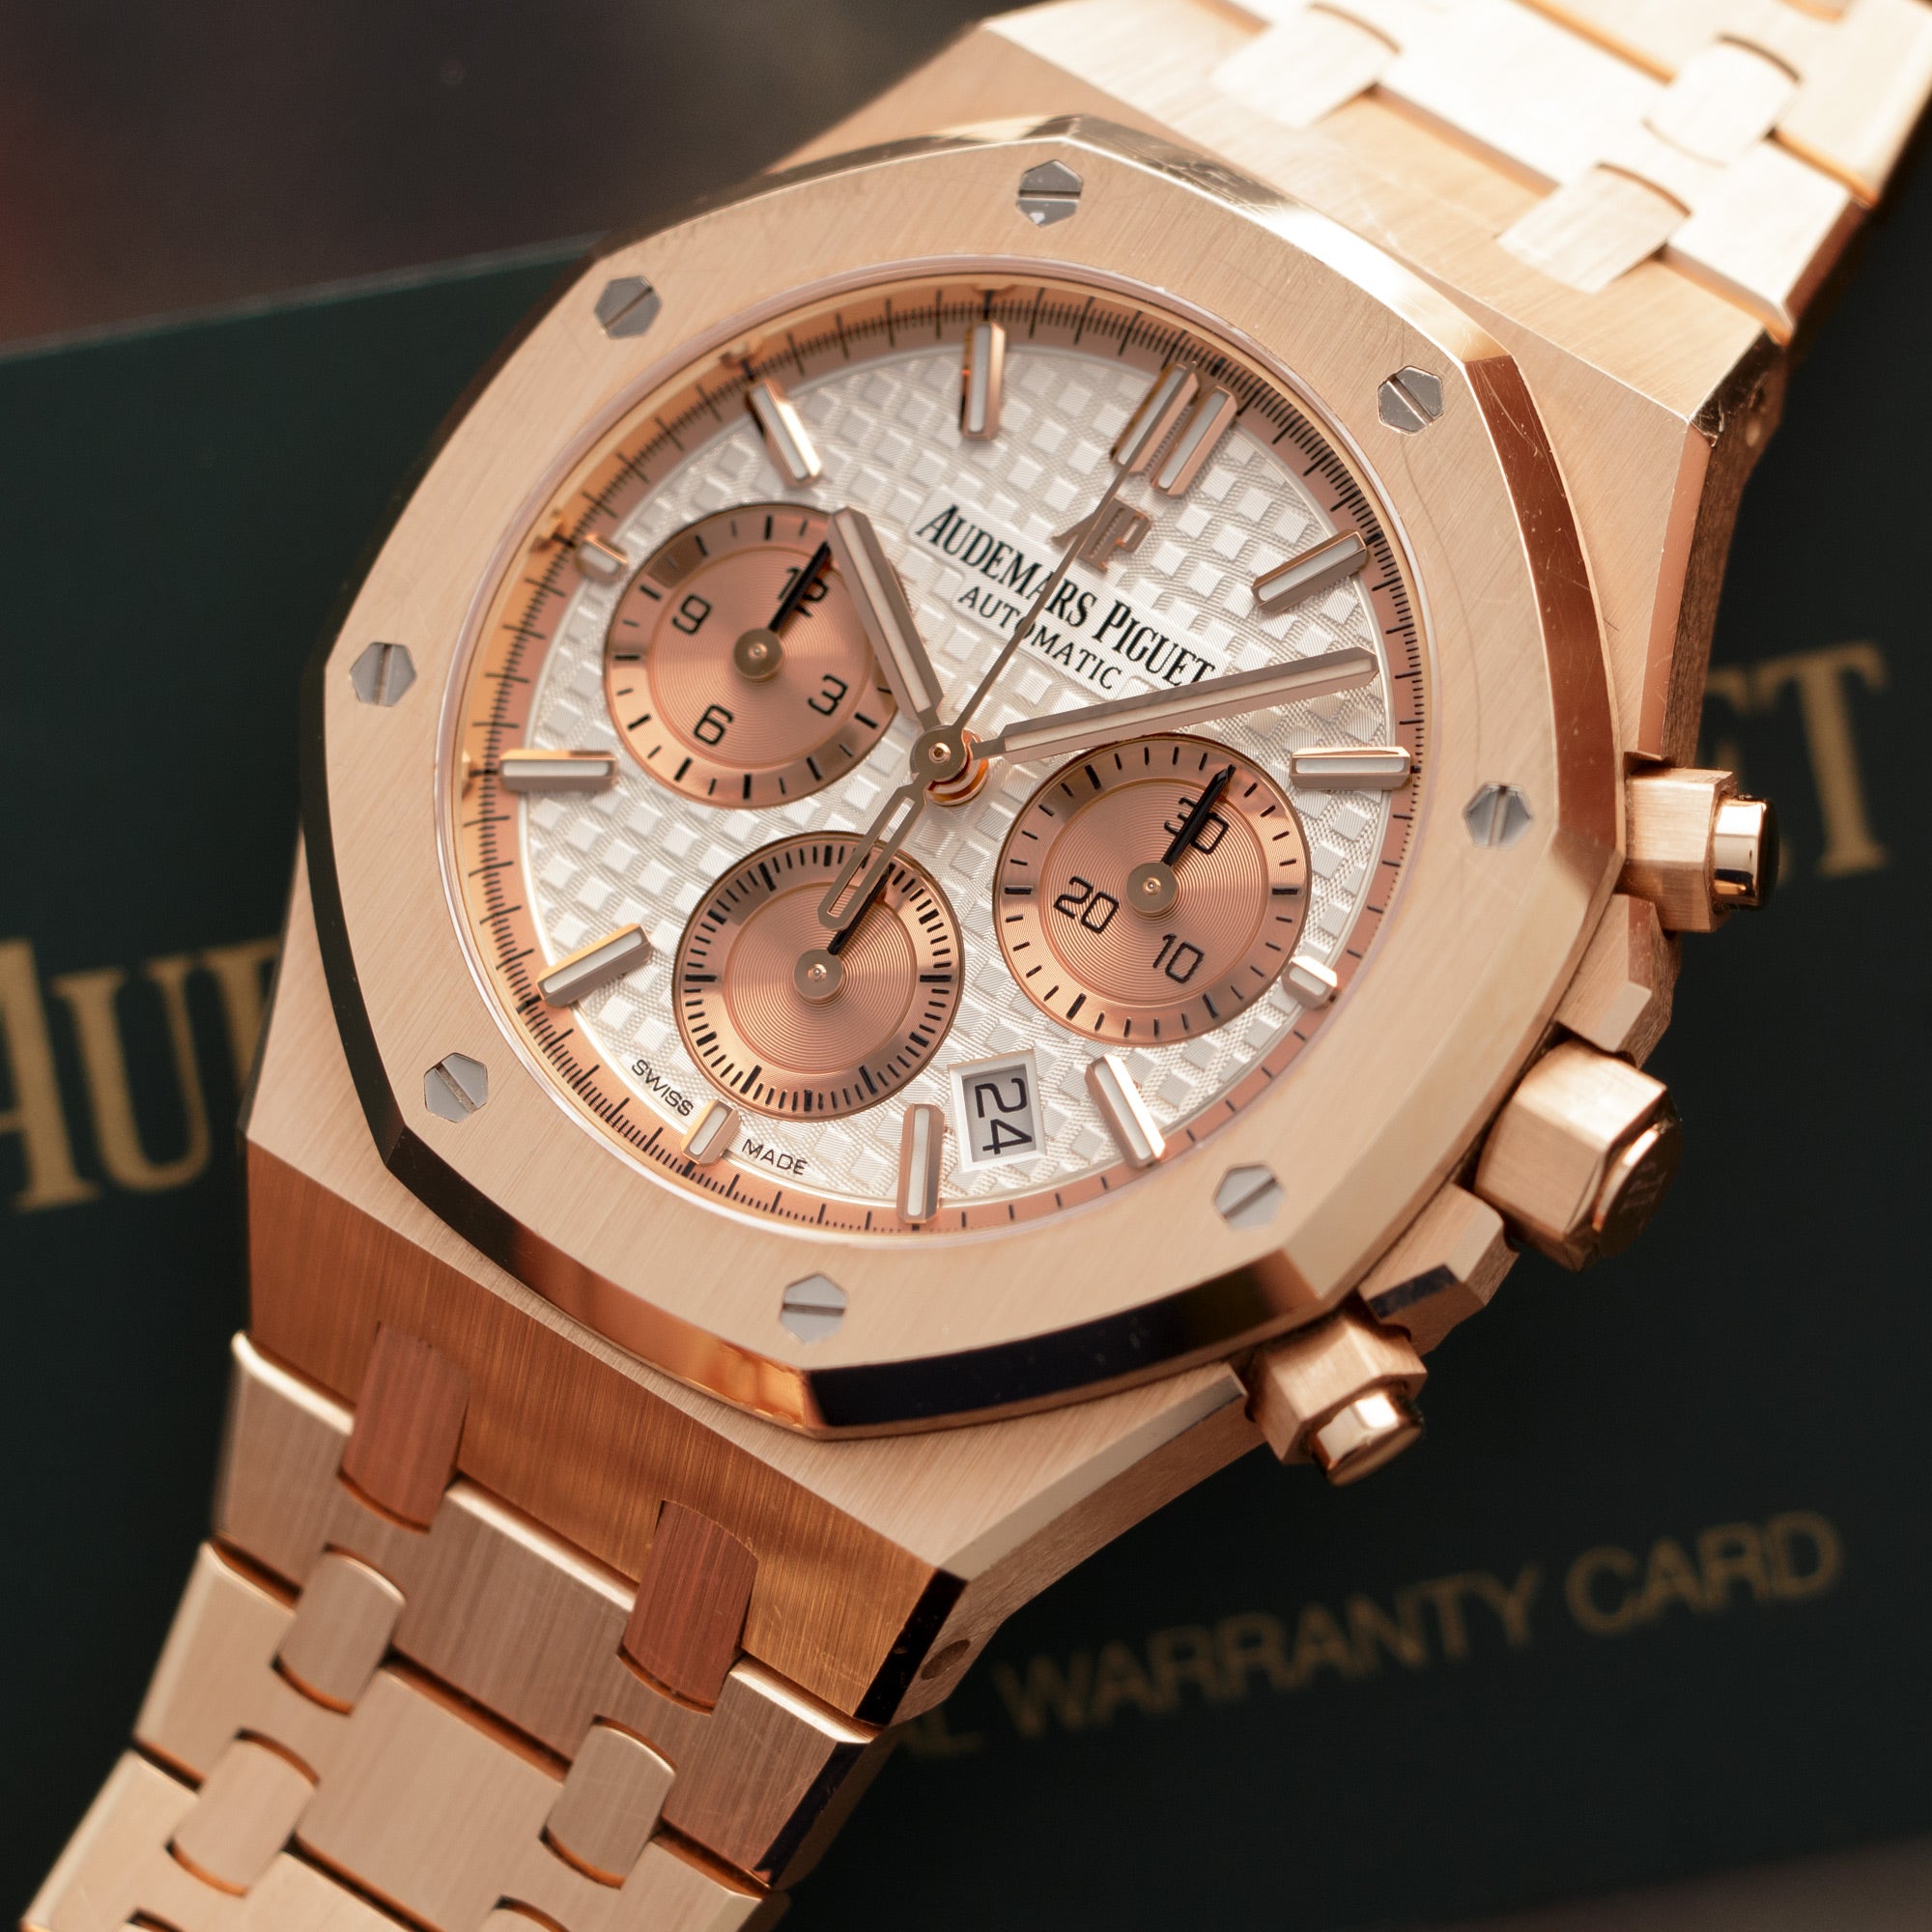 Audemars Piguet Royal Oak Chrono 26315OR.OO.1256 18k RG  Excellent Overall Condition, No Notable Signs of Wear Unisex 18k RG Silver 38 mm Automatic Current Rose Gold Original Warranty Card 